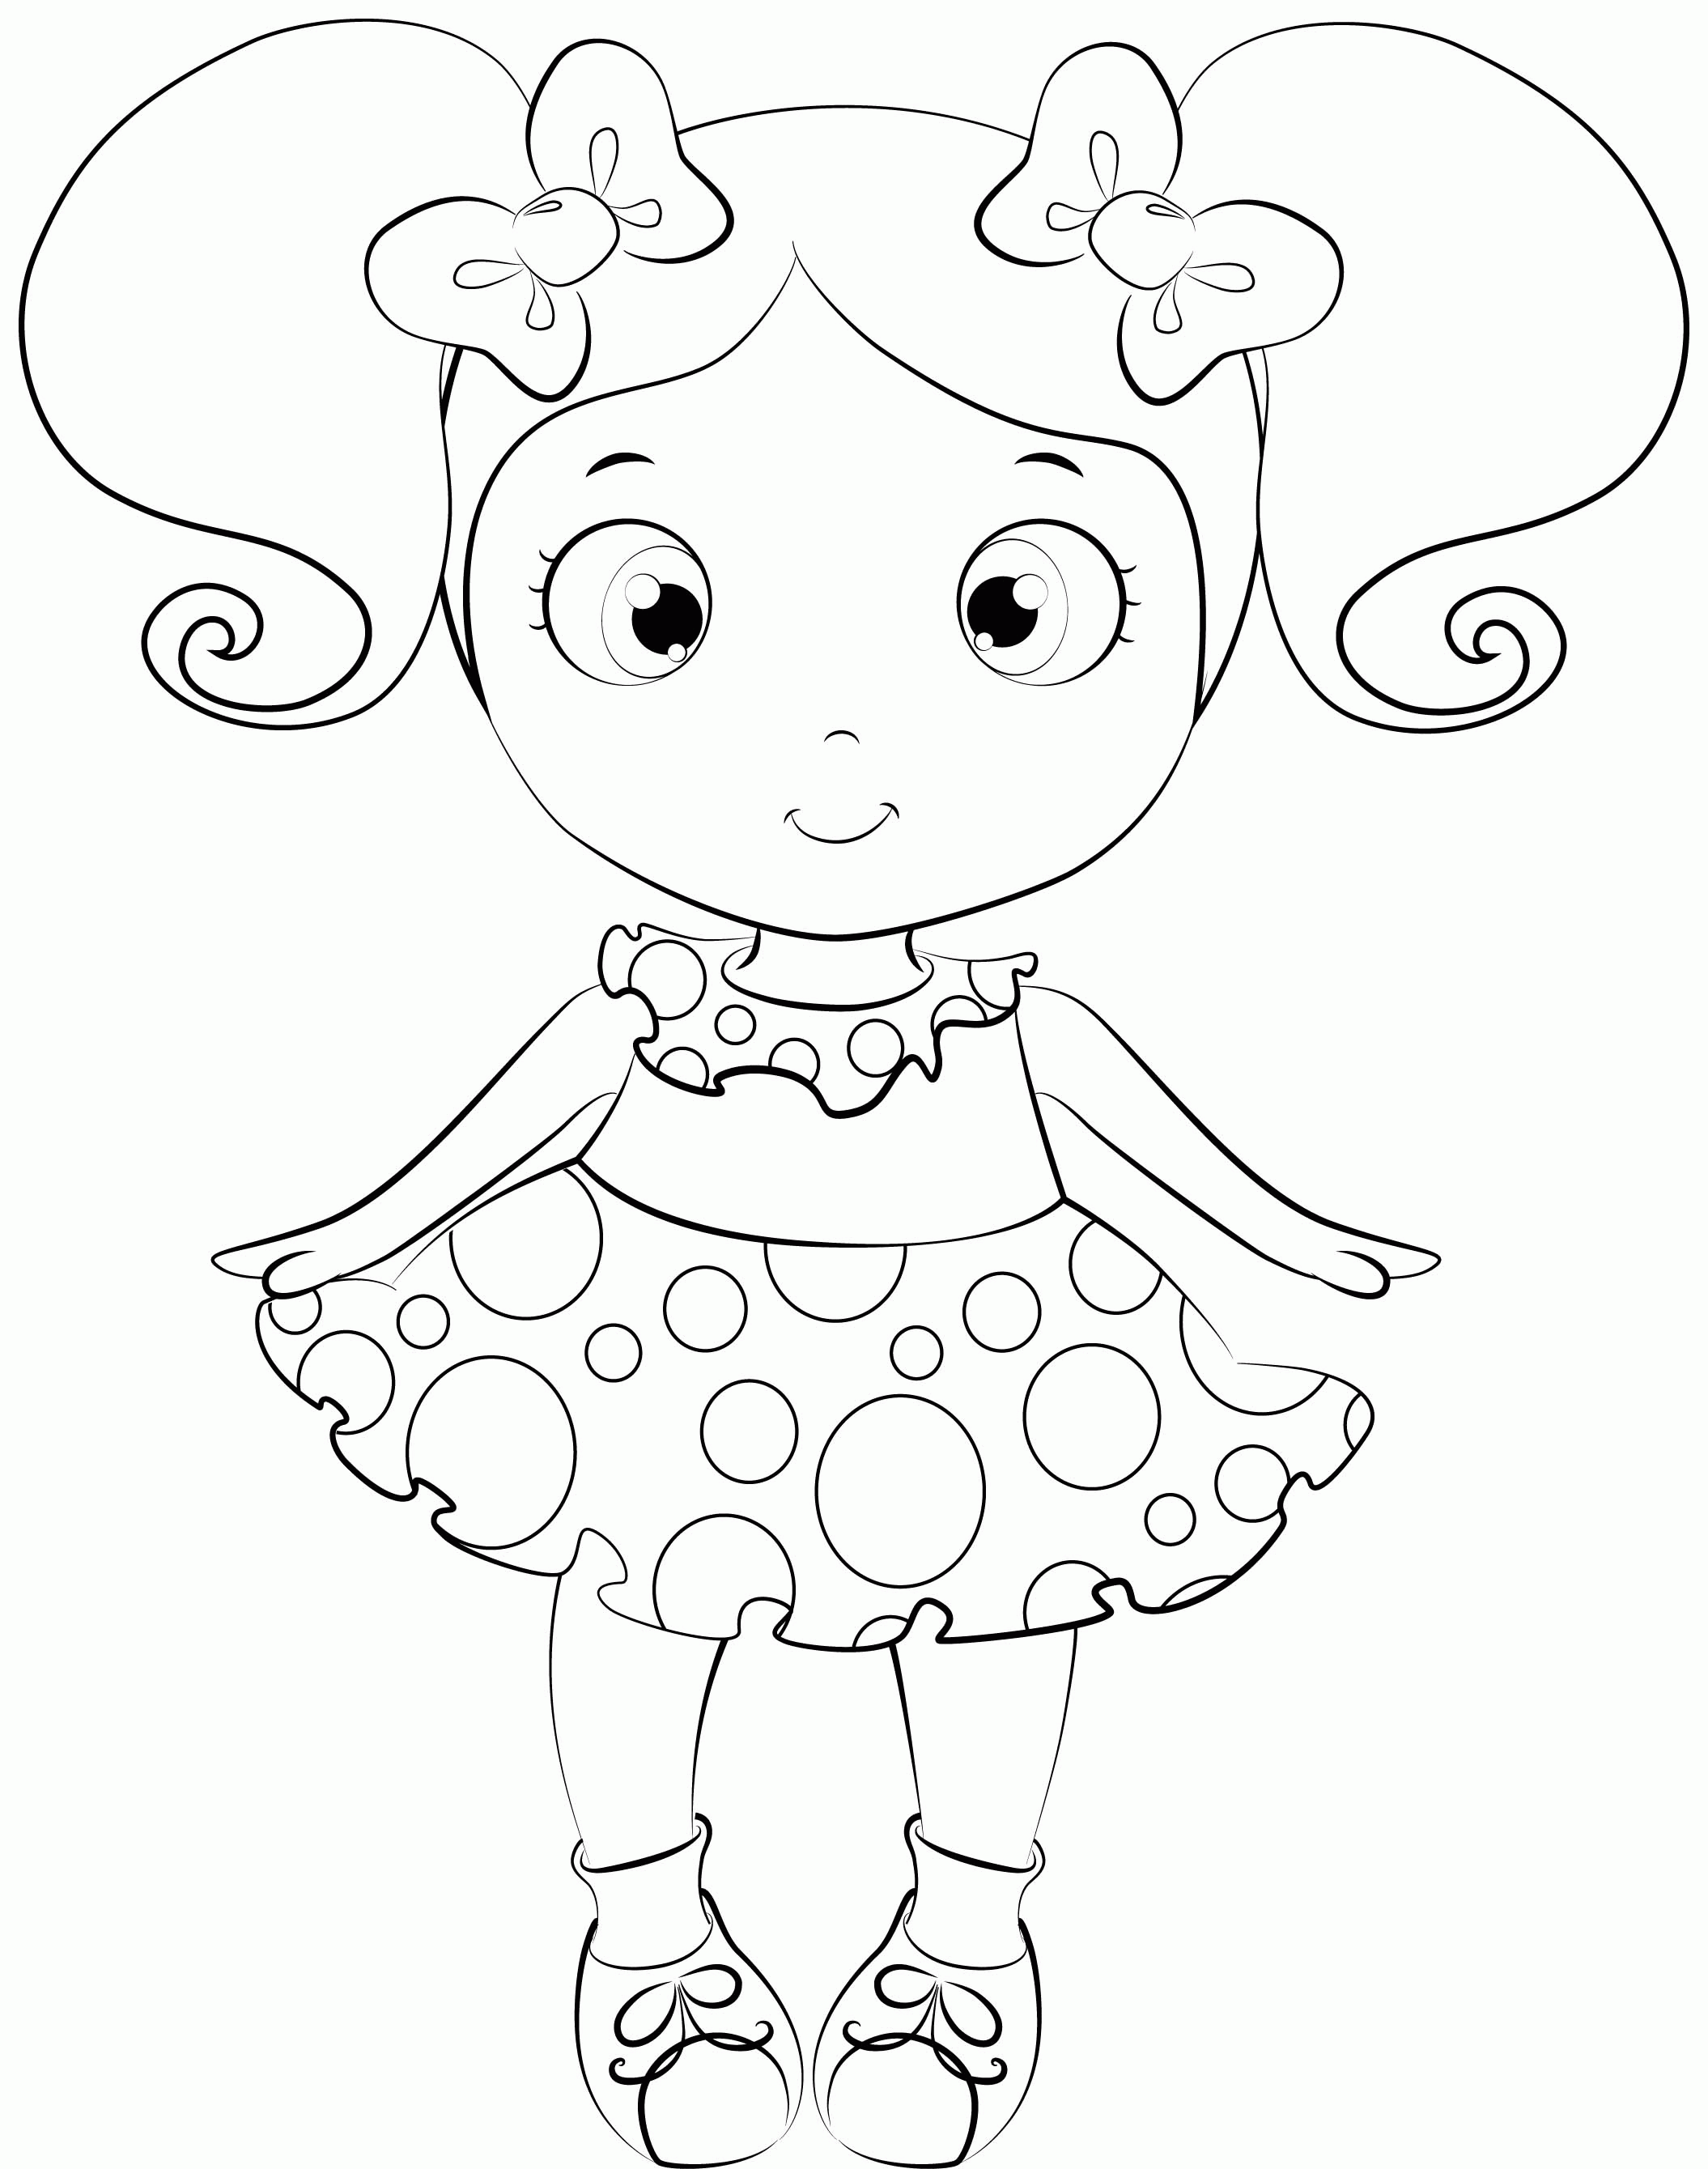 doll coloring page doll coloring pages getcoloringpagescom doll page coloring 